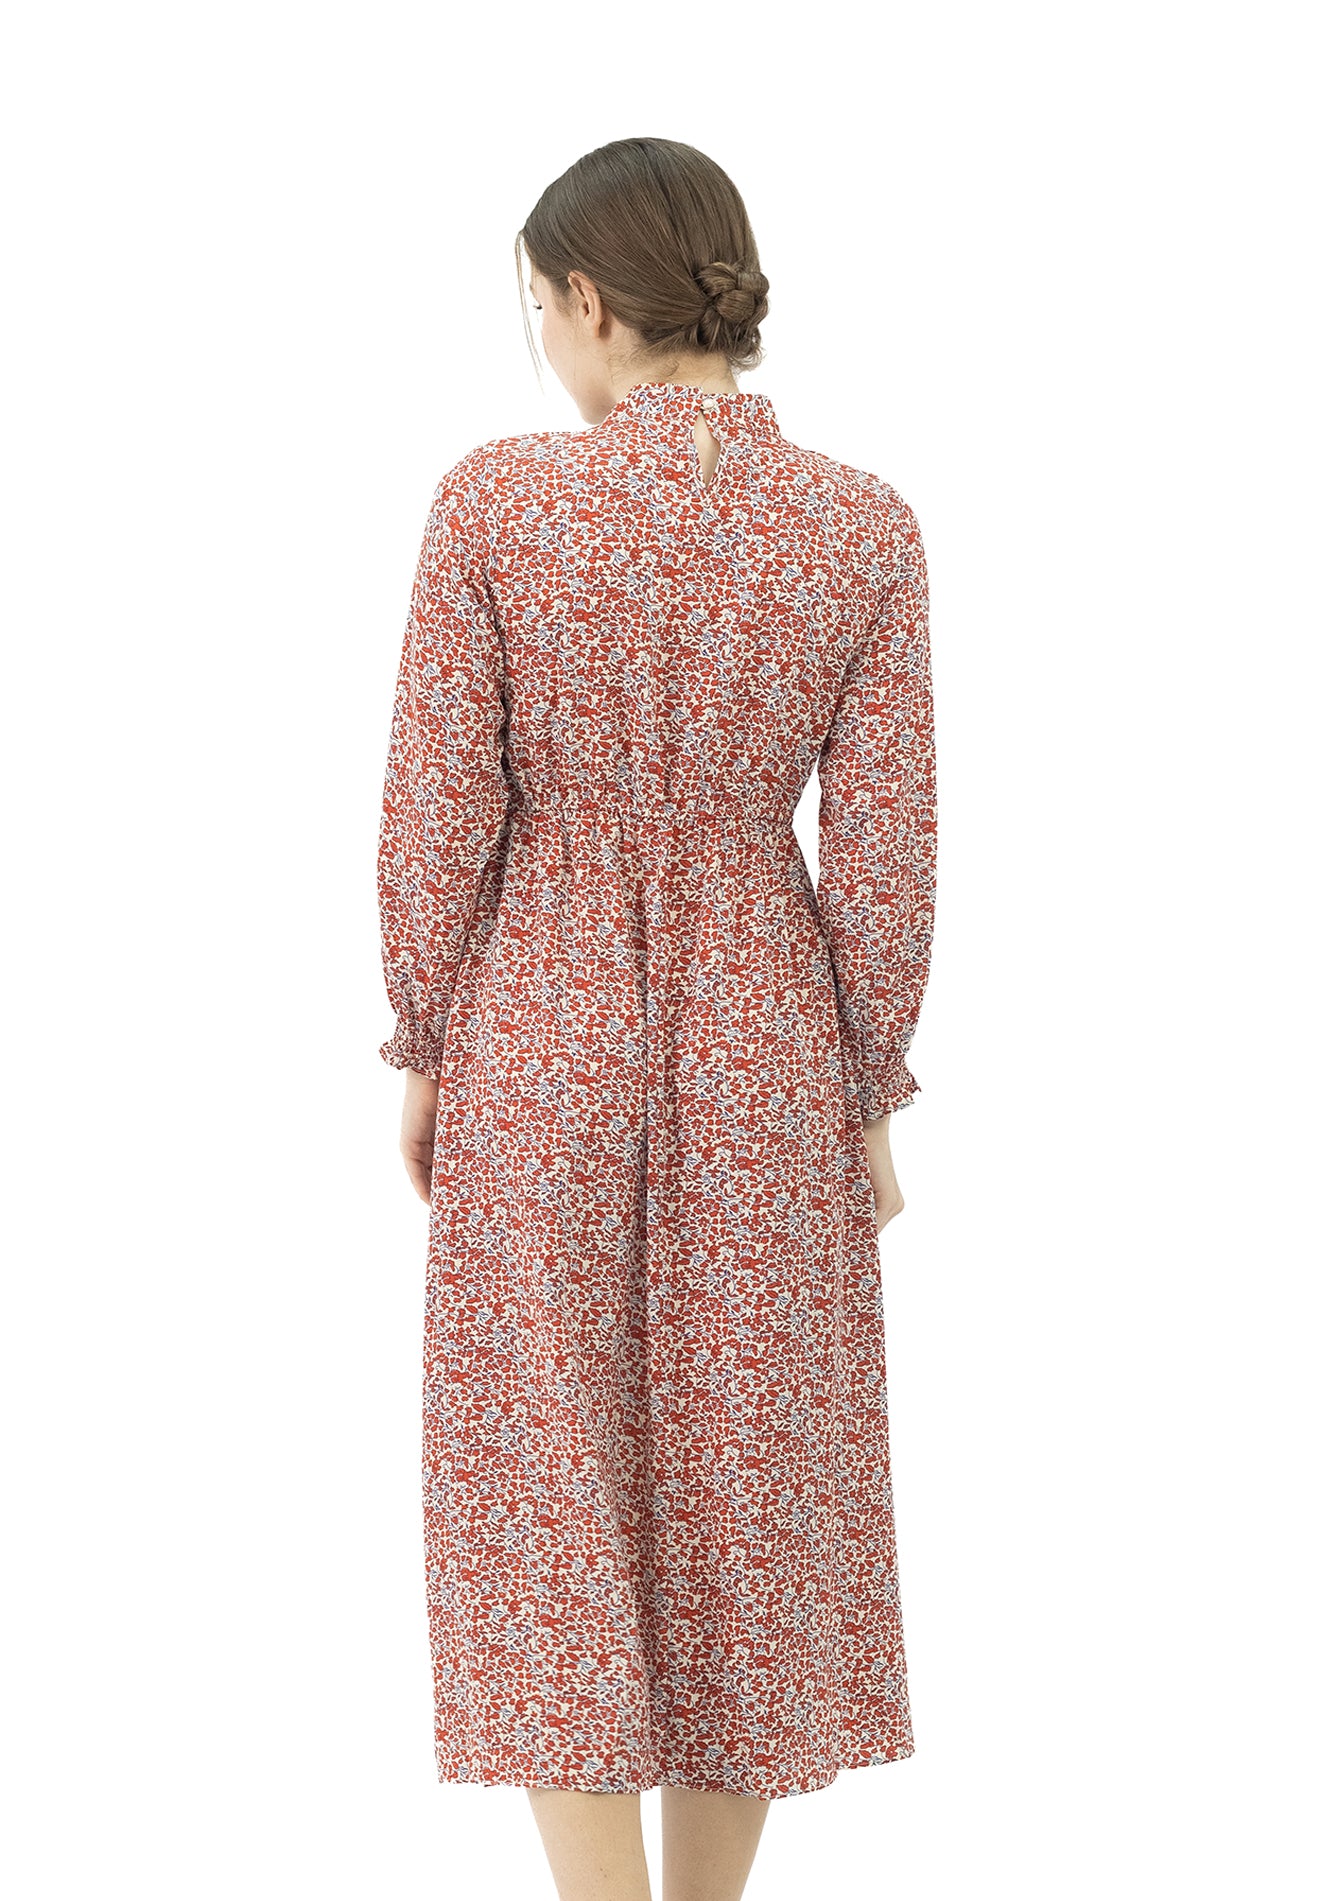 DAISY BY VOIR Tie Neck Long Sleeves Vintage Dress